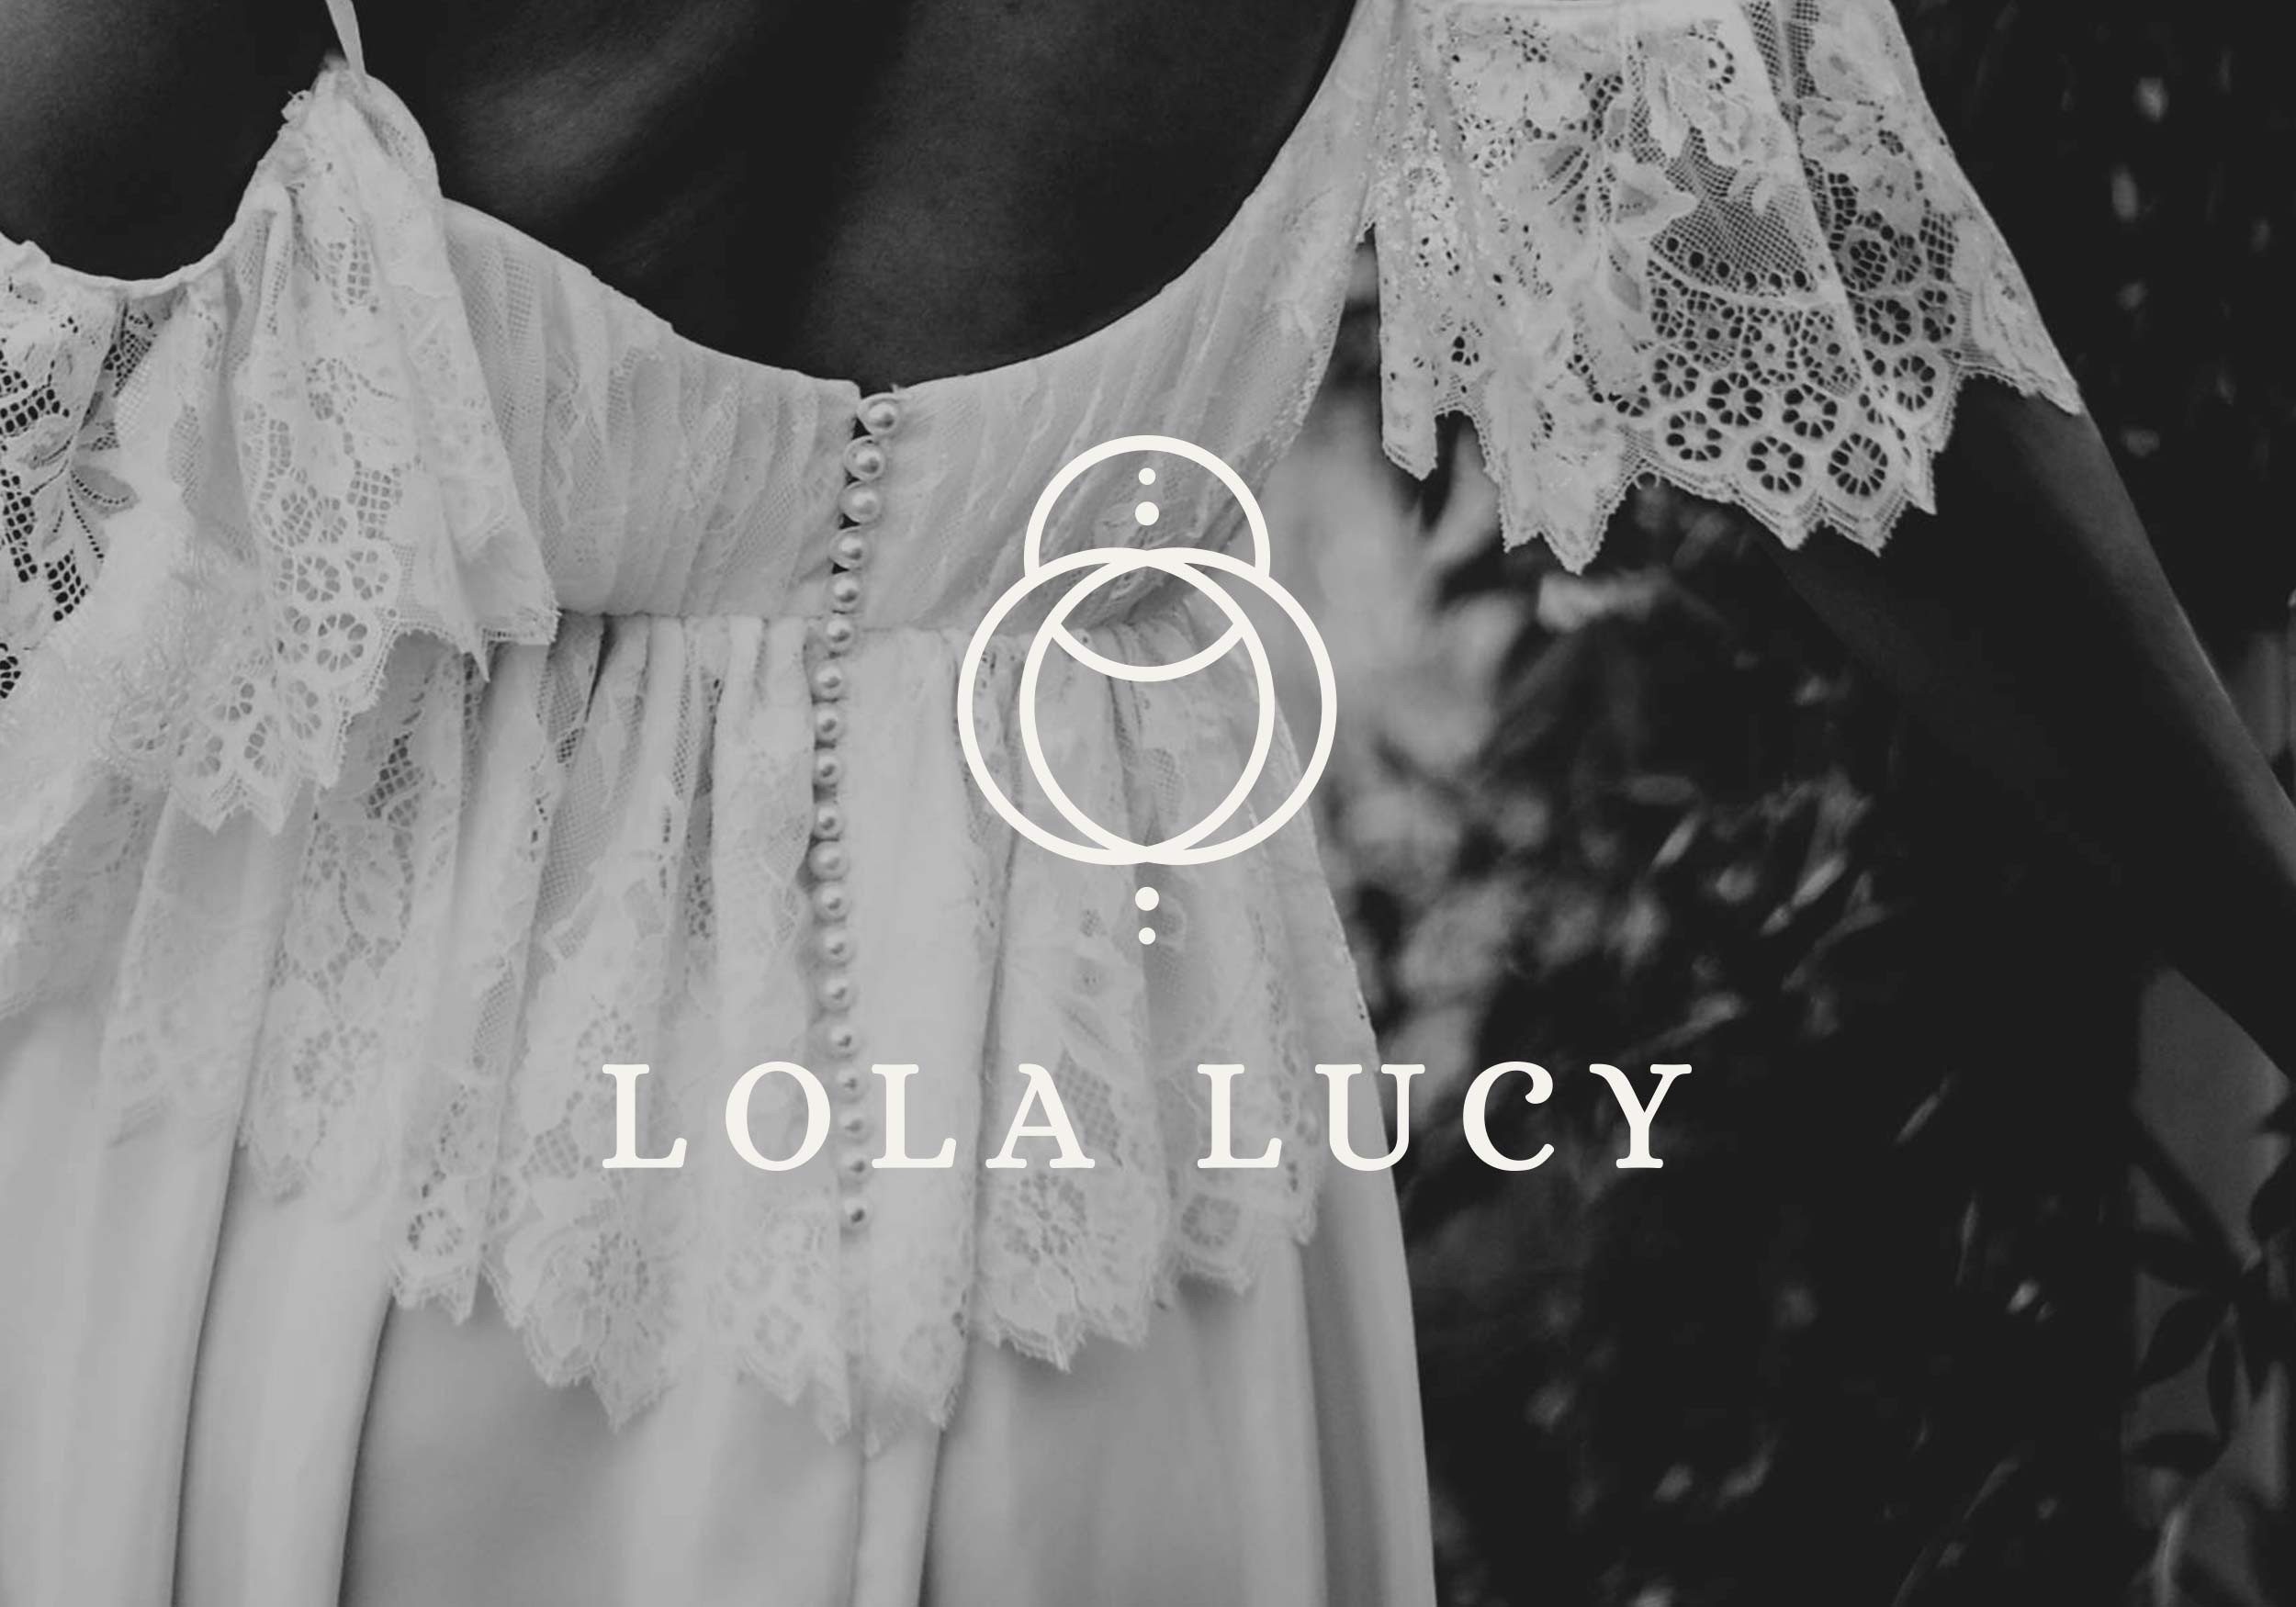 Lola Lucy